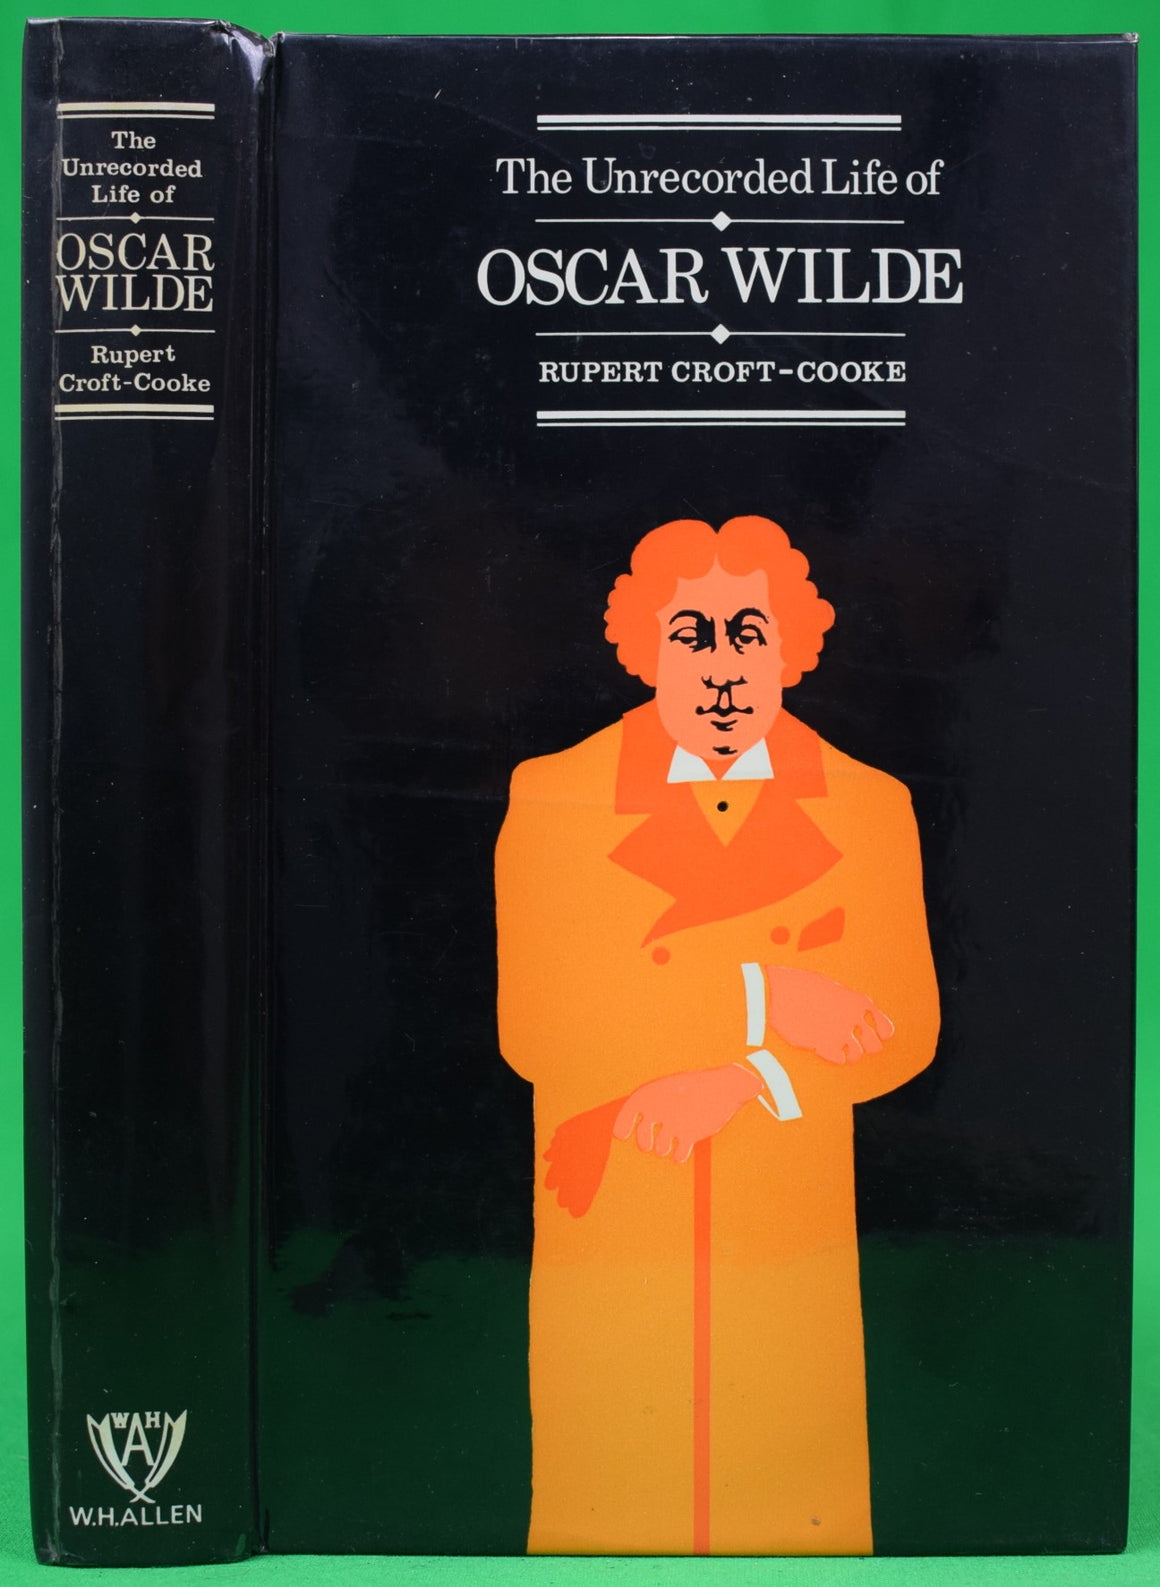 "The Unrecorded Life Of Oscar Wilde" 1972 CROFT-COOKE, Rupert